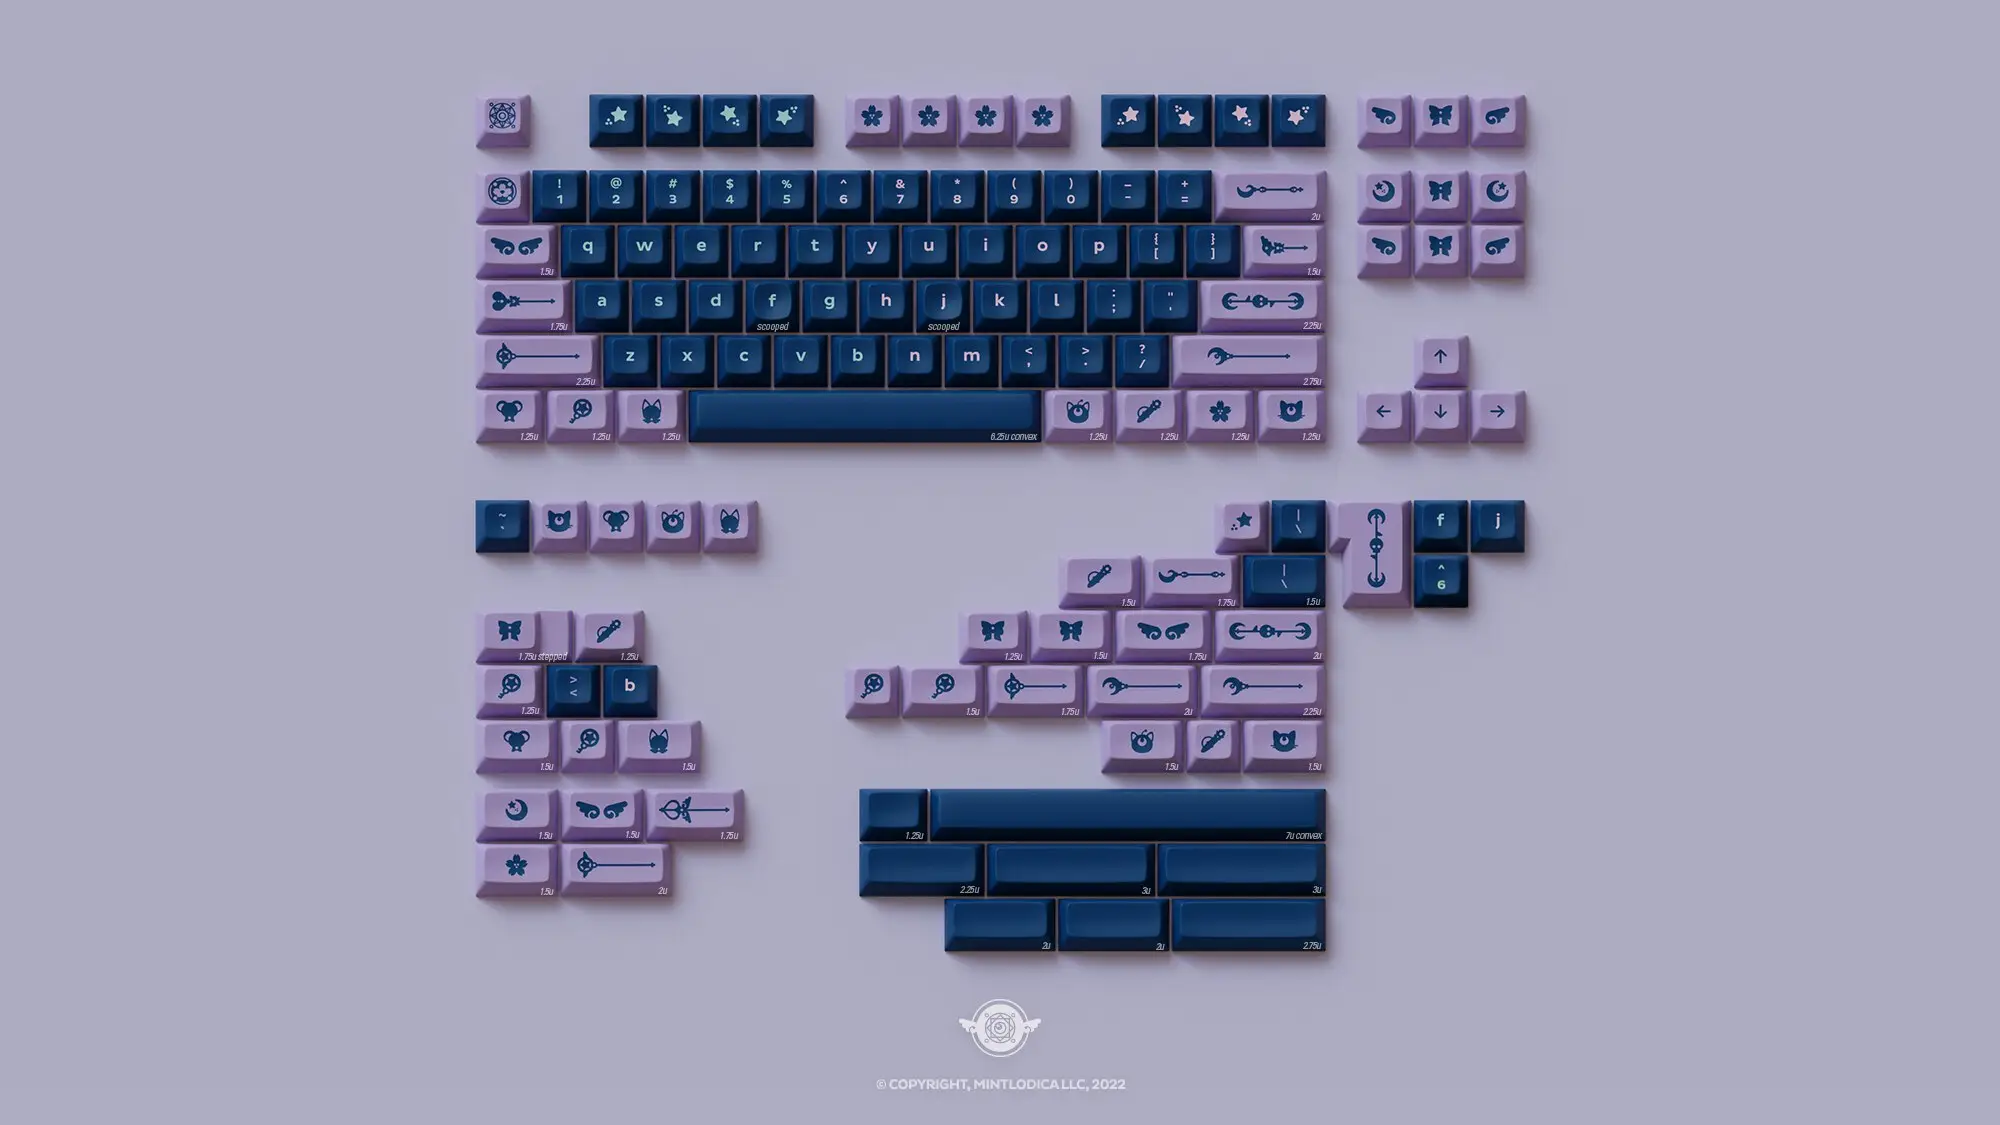 A series of light purple and dark blue keyboard keys, arranged in a grid. Some of the keys bear symbols of magical girls, like wands, bows, and hearts